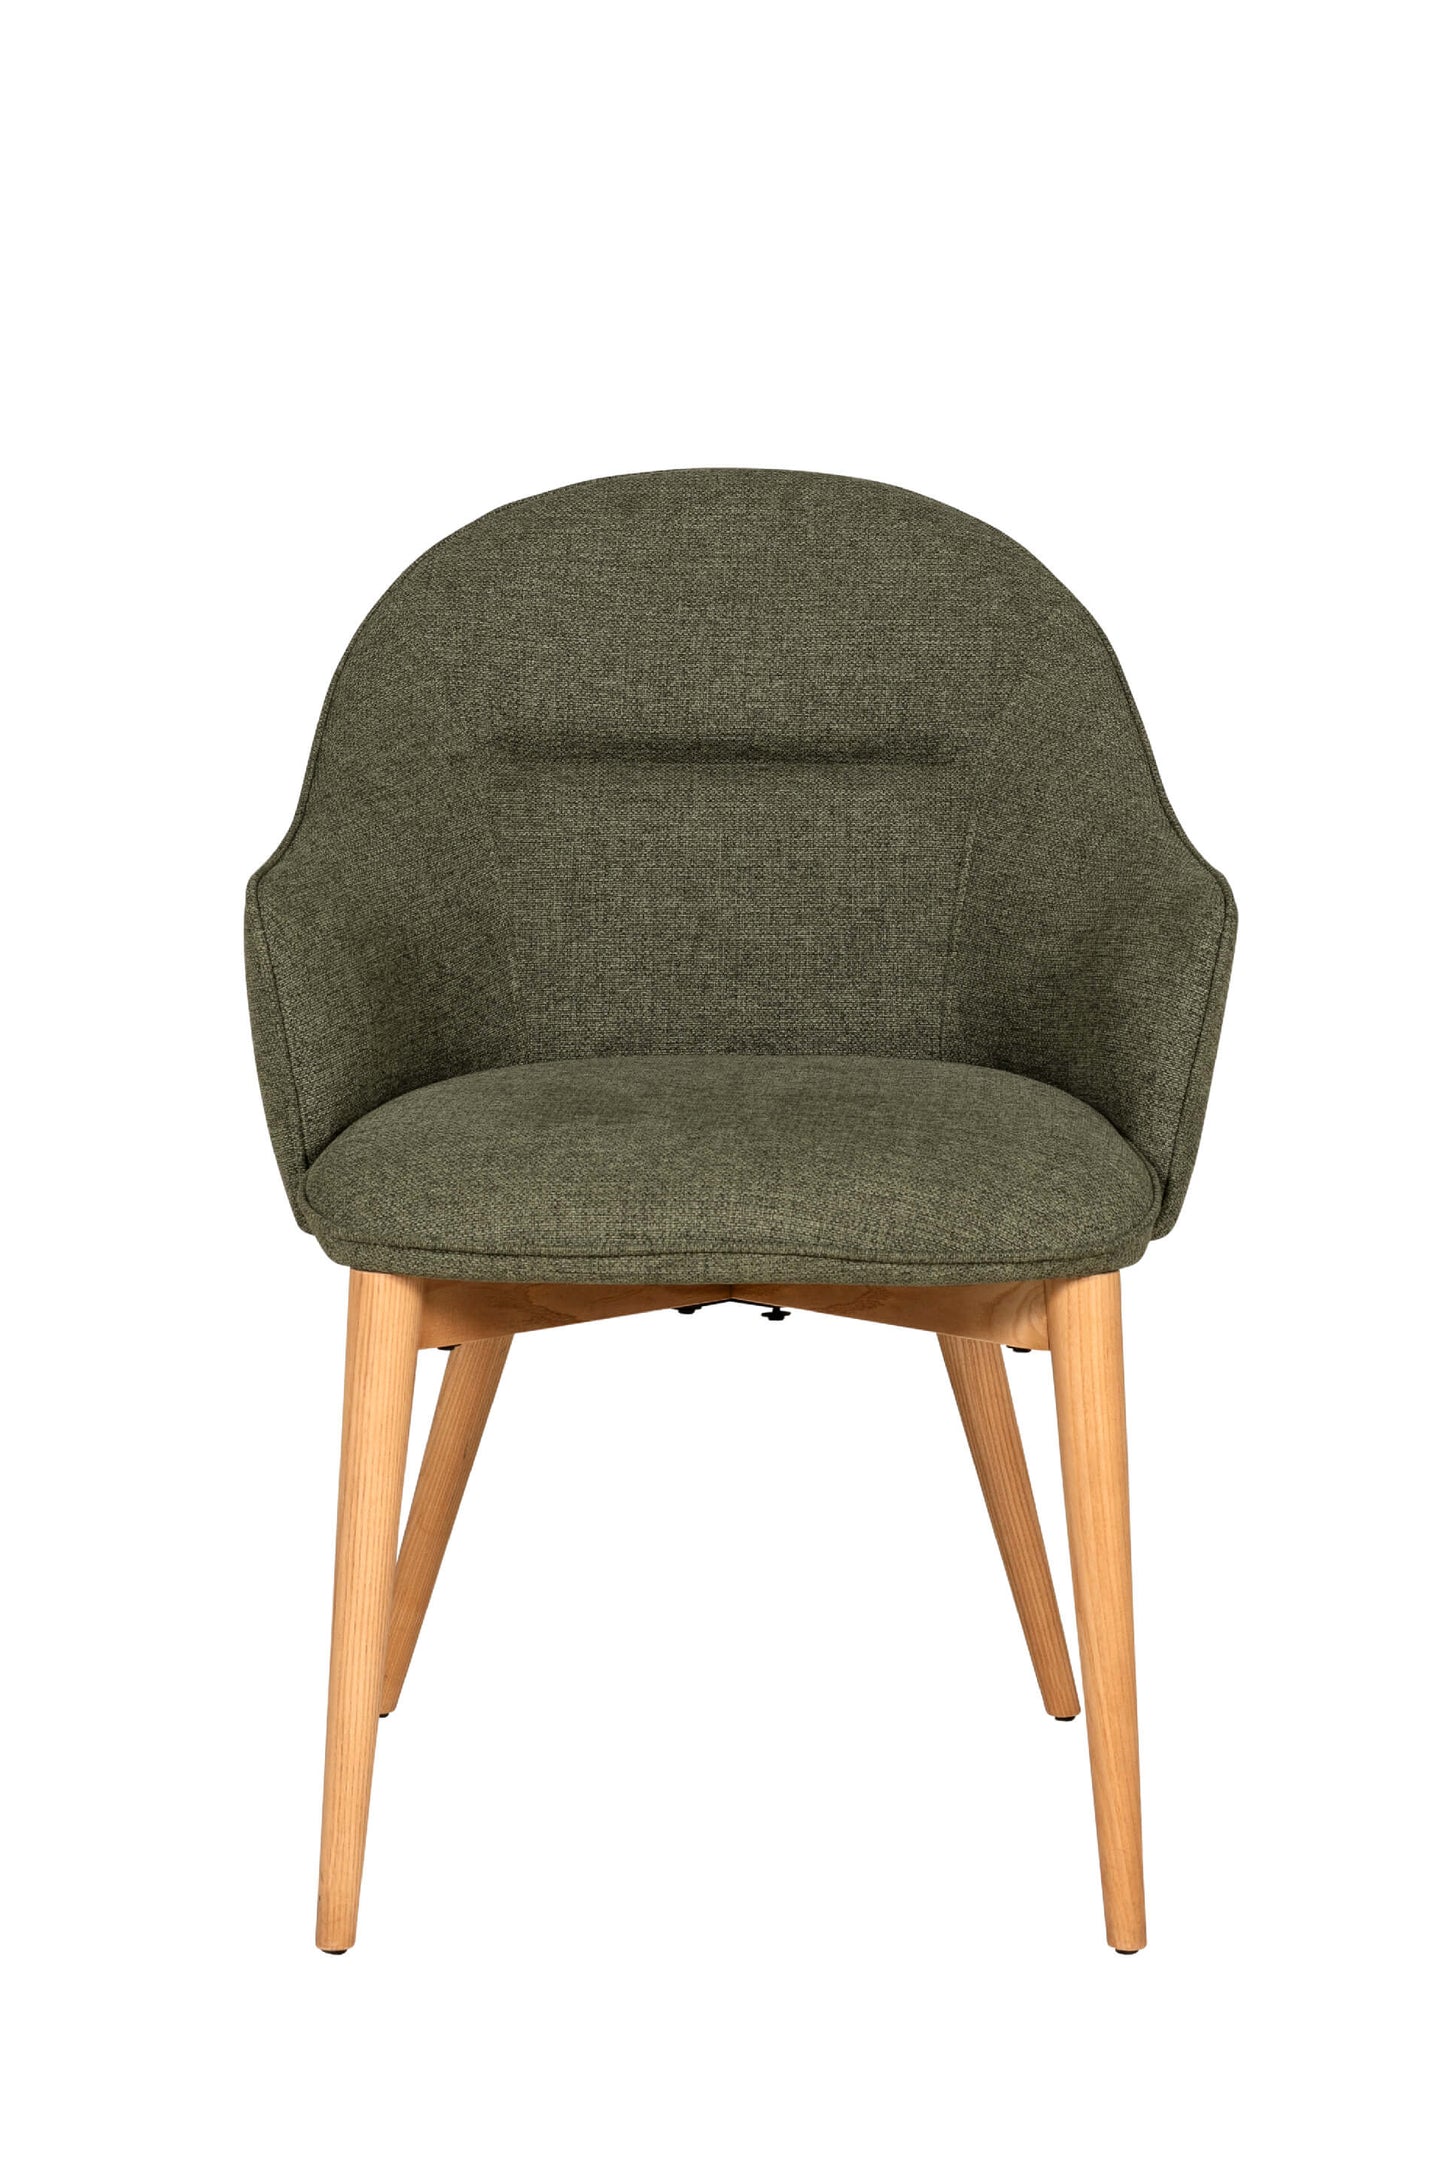 Evalyn Dining Chair - Green